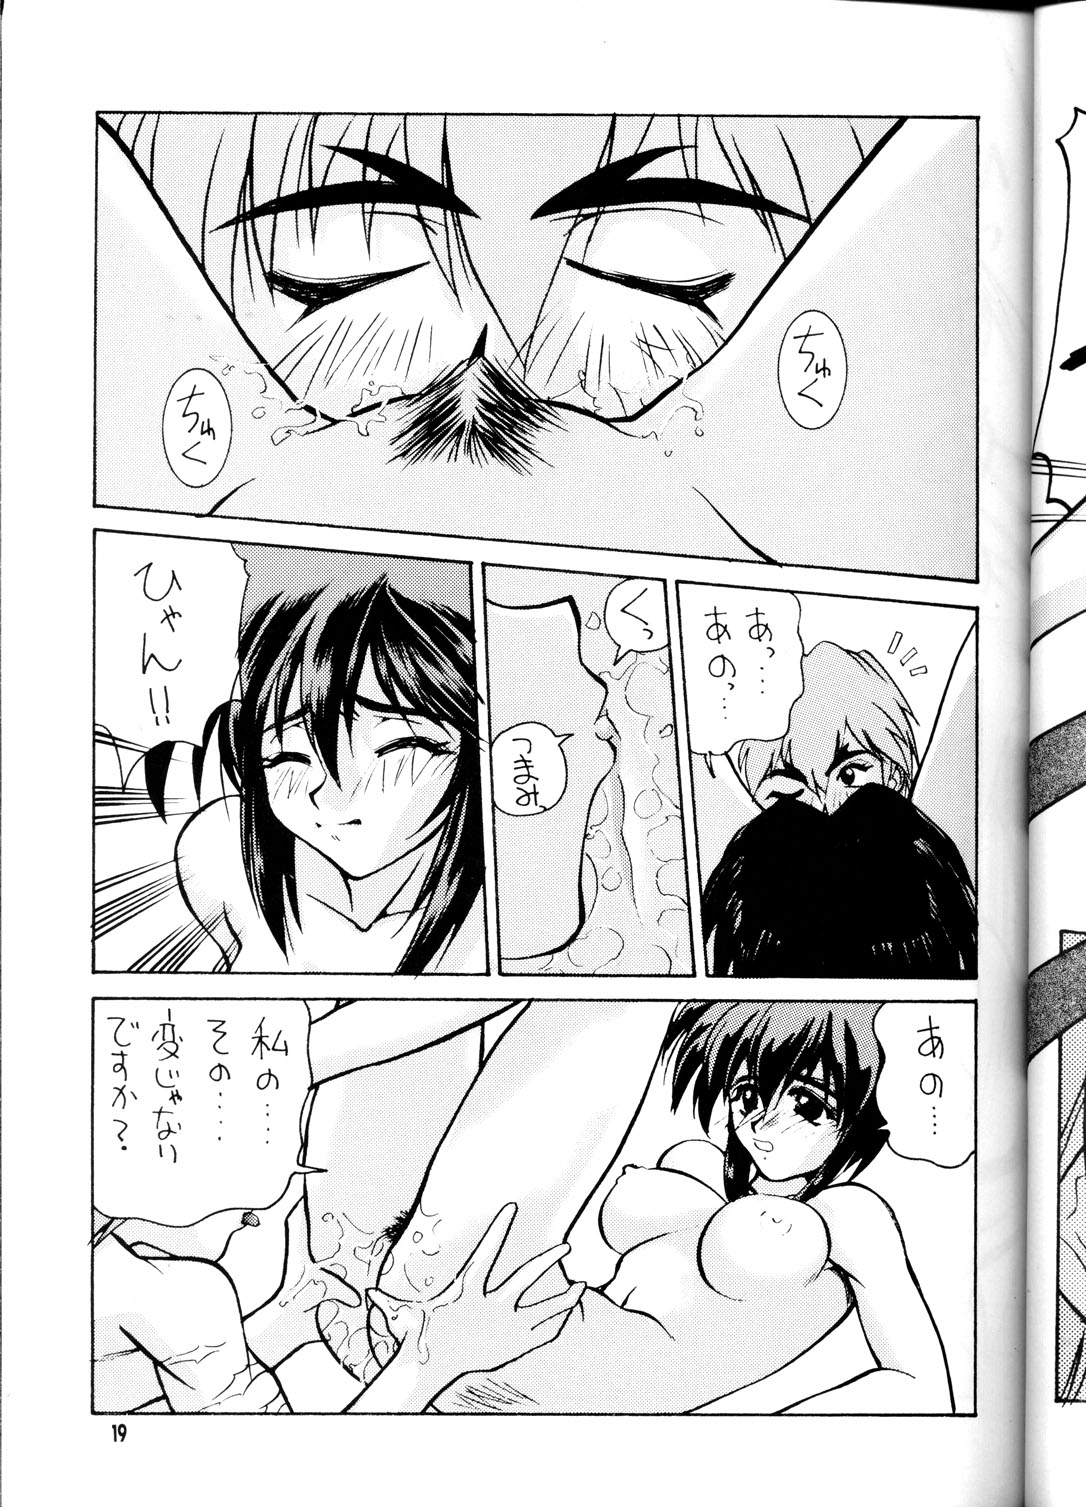 (CR23) [GOLD RUSH (Suzuki Address)] OUTLAW STAR (Various) page 18 full